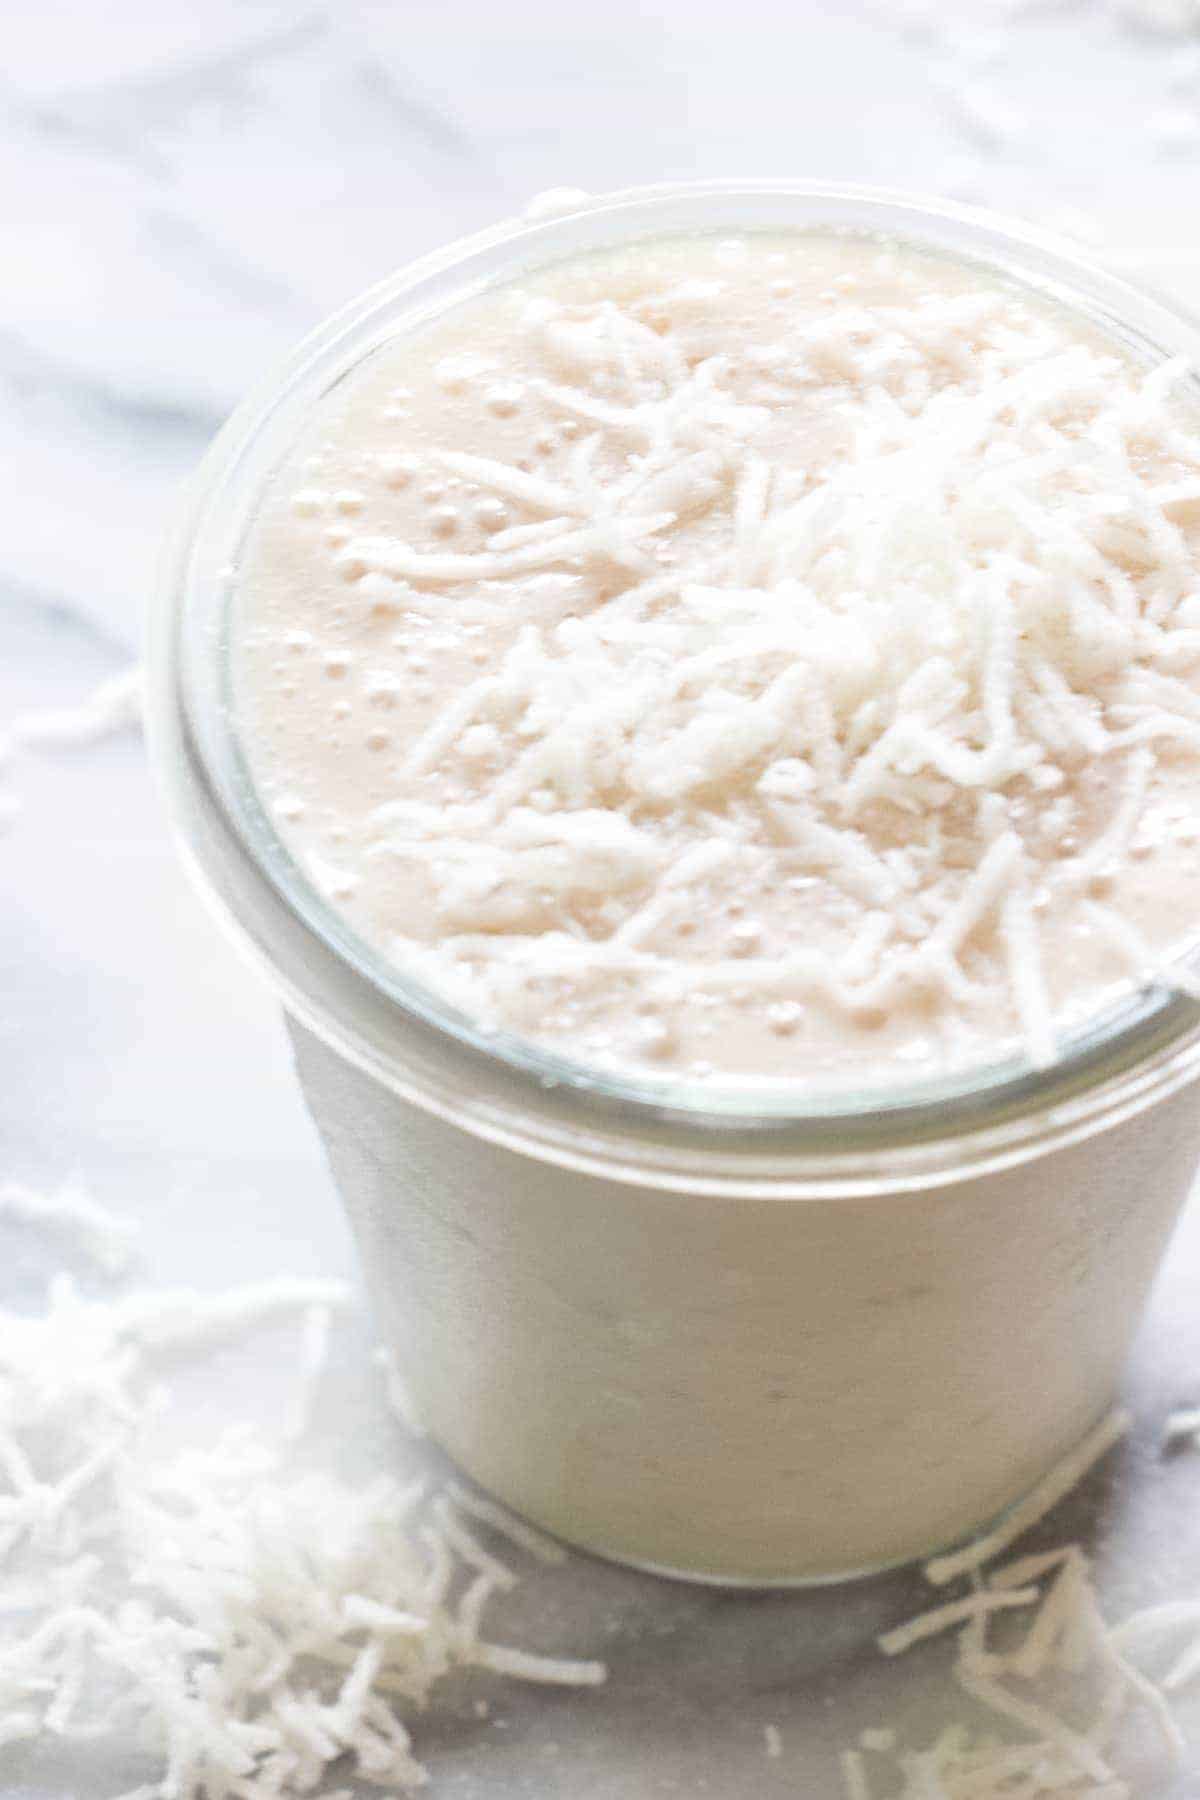 Coconut Smoothie. This smoothie is loaded with coconut flavor! Made with coconut milk and other natural ingredients, this is guaranteed the best way to start the day!